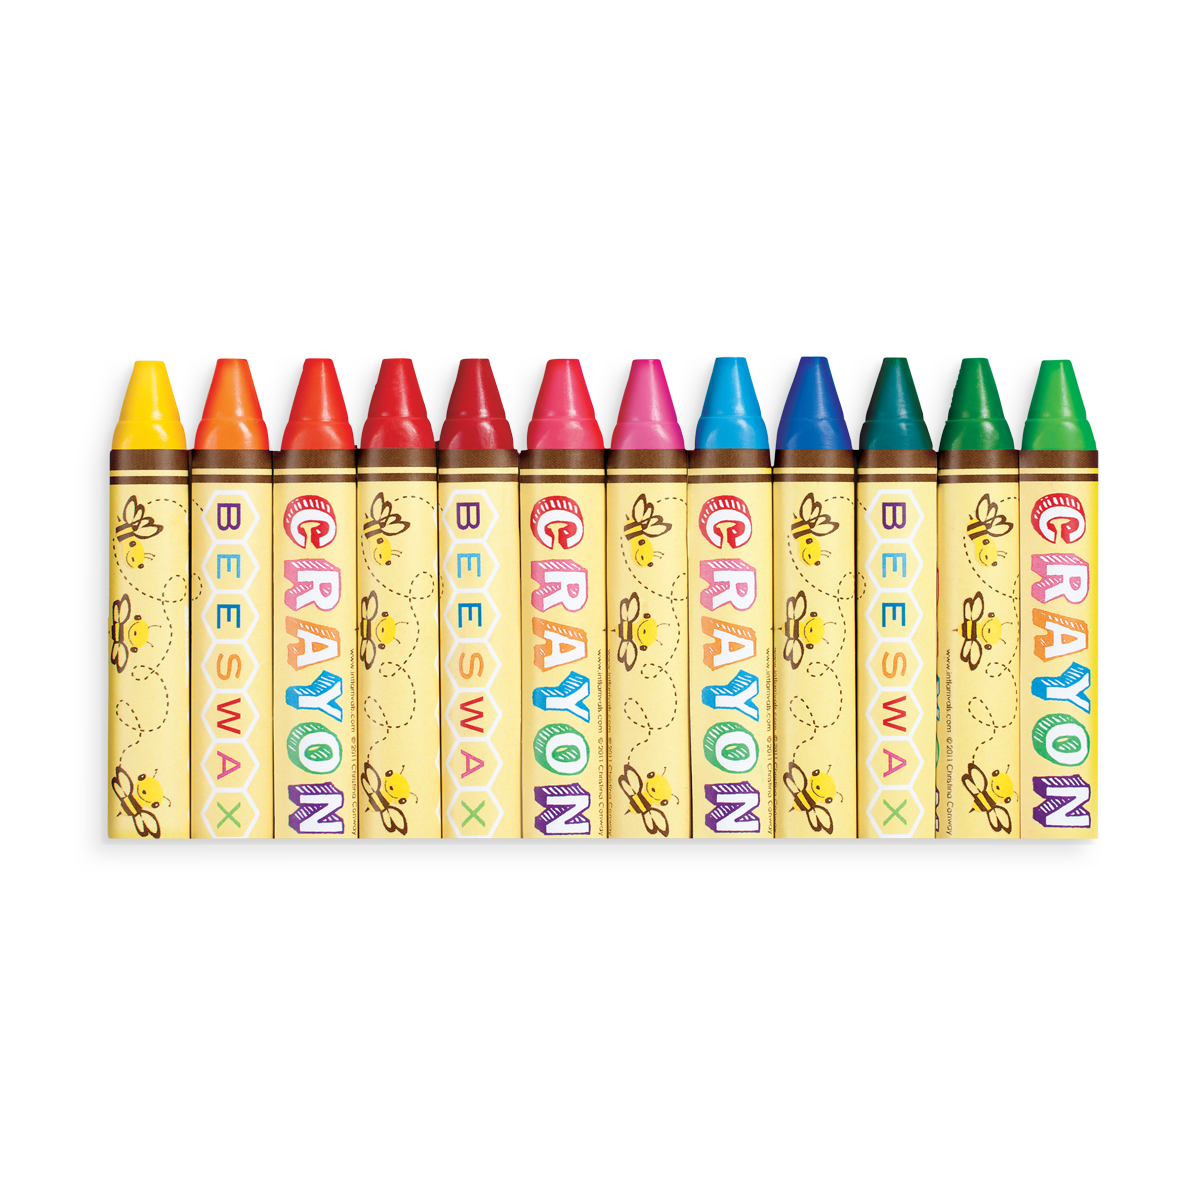 Beeswax Crayons for Toddlers - Three Yellow Starfish